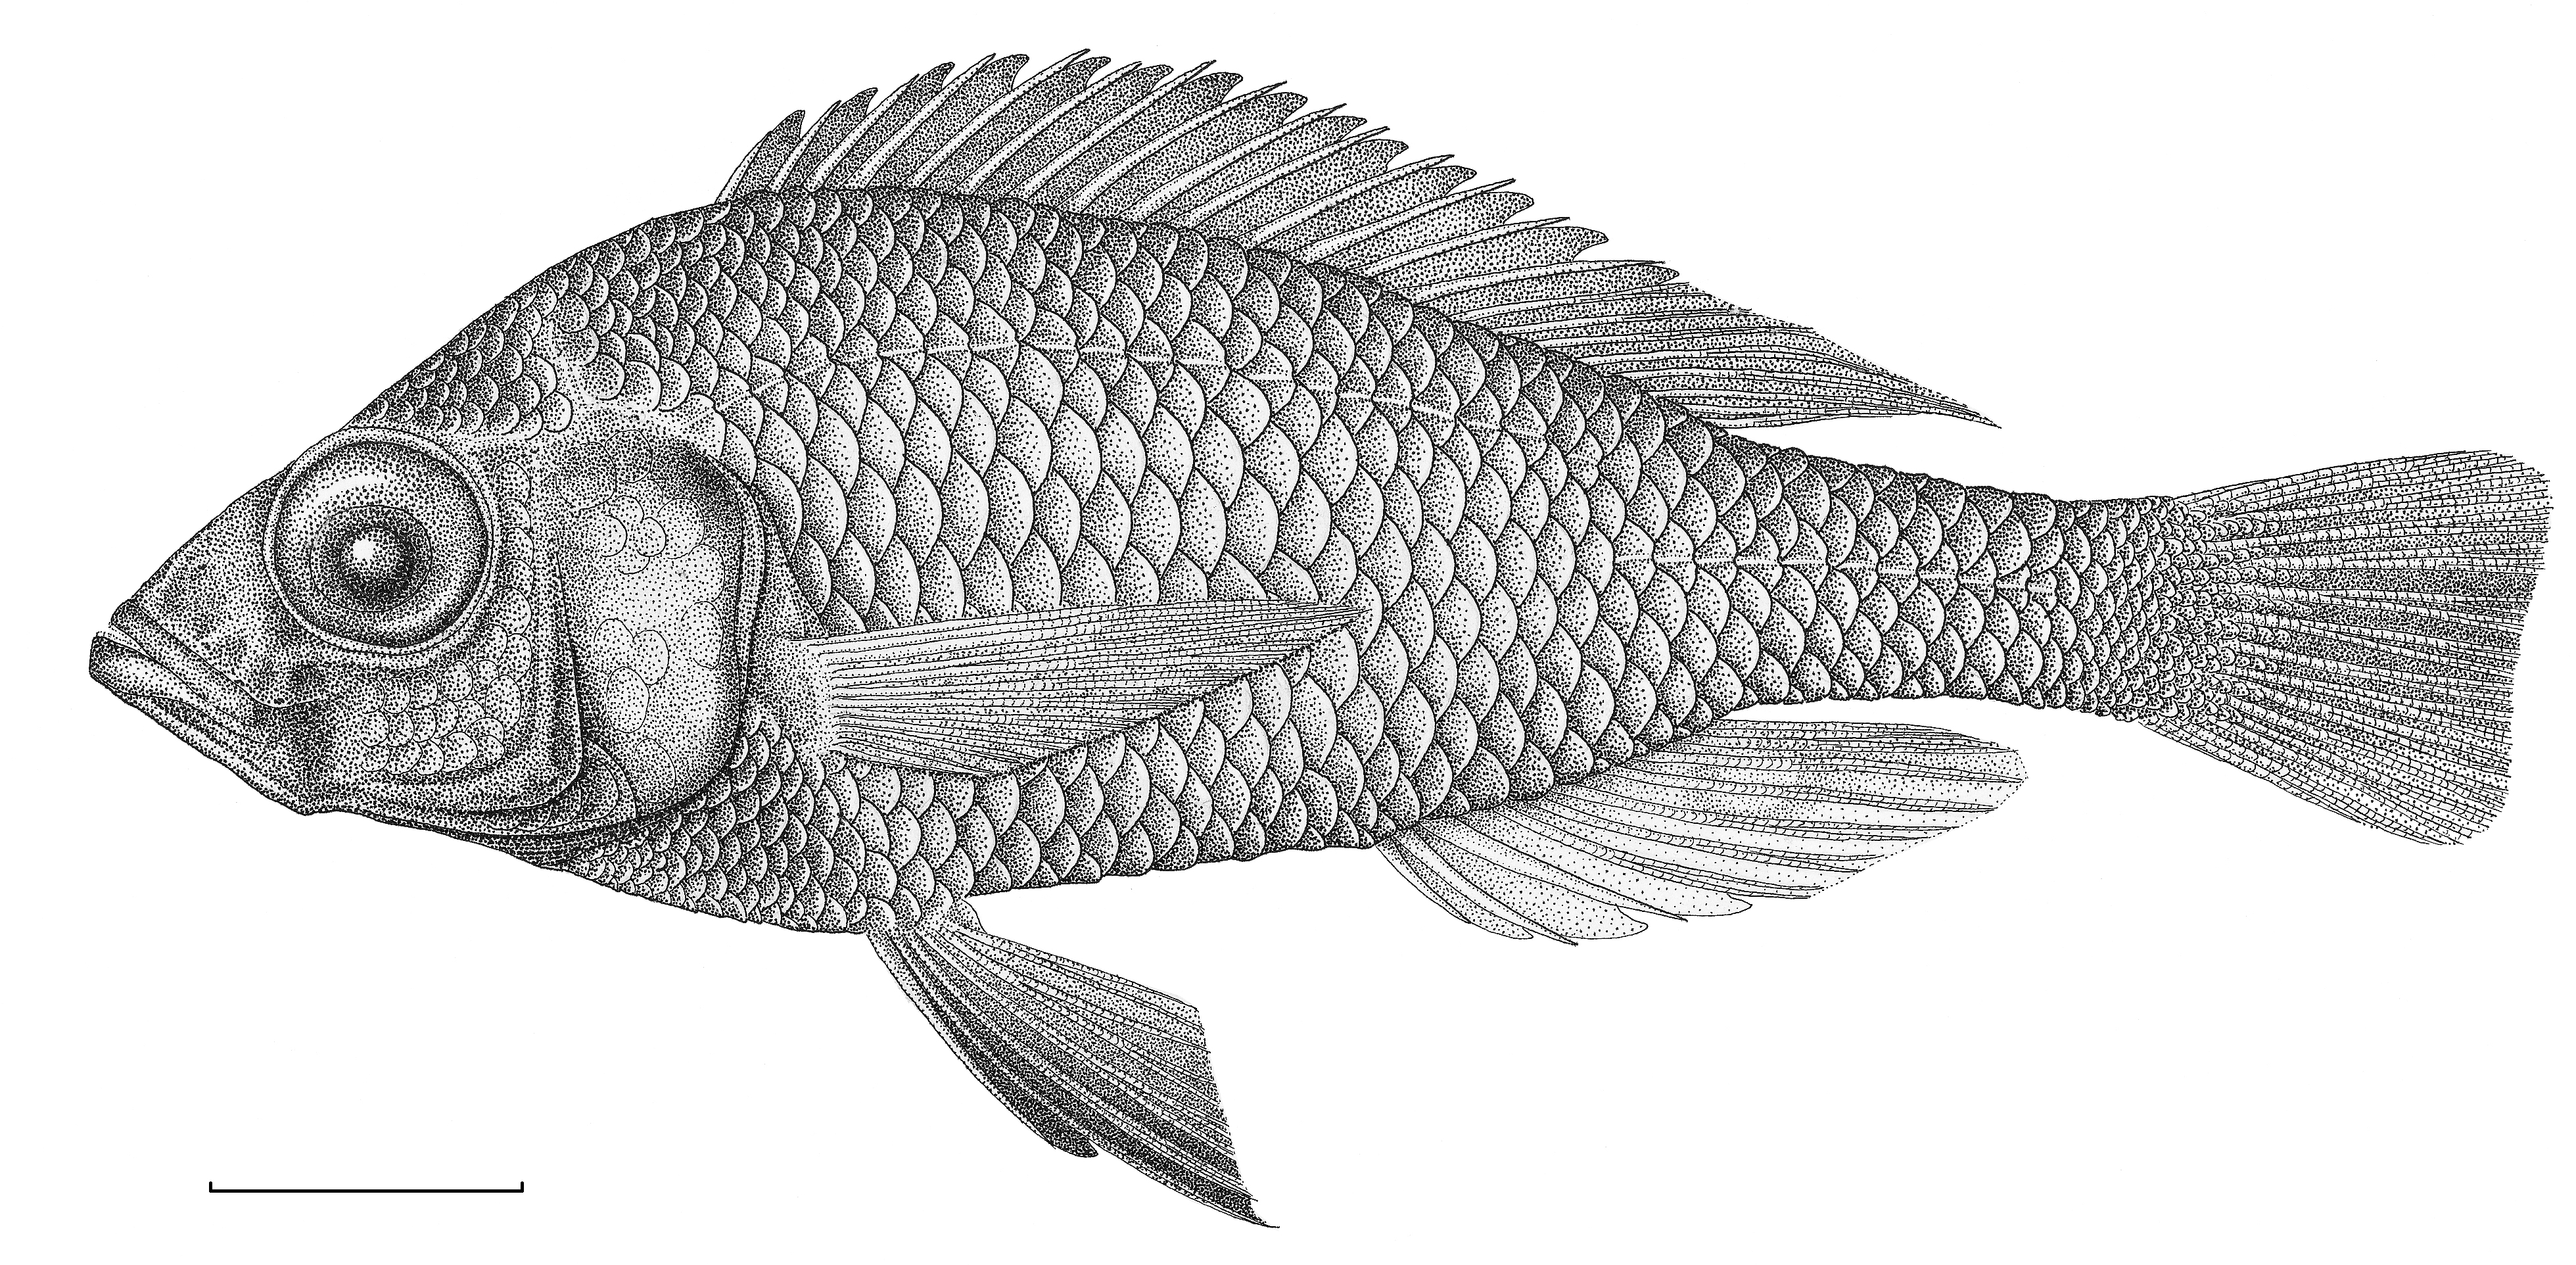 Free Fish Drawing Pictures, Download Free Fish Drawing Pictures png